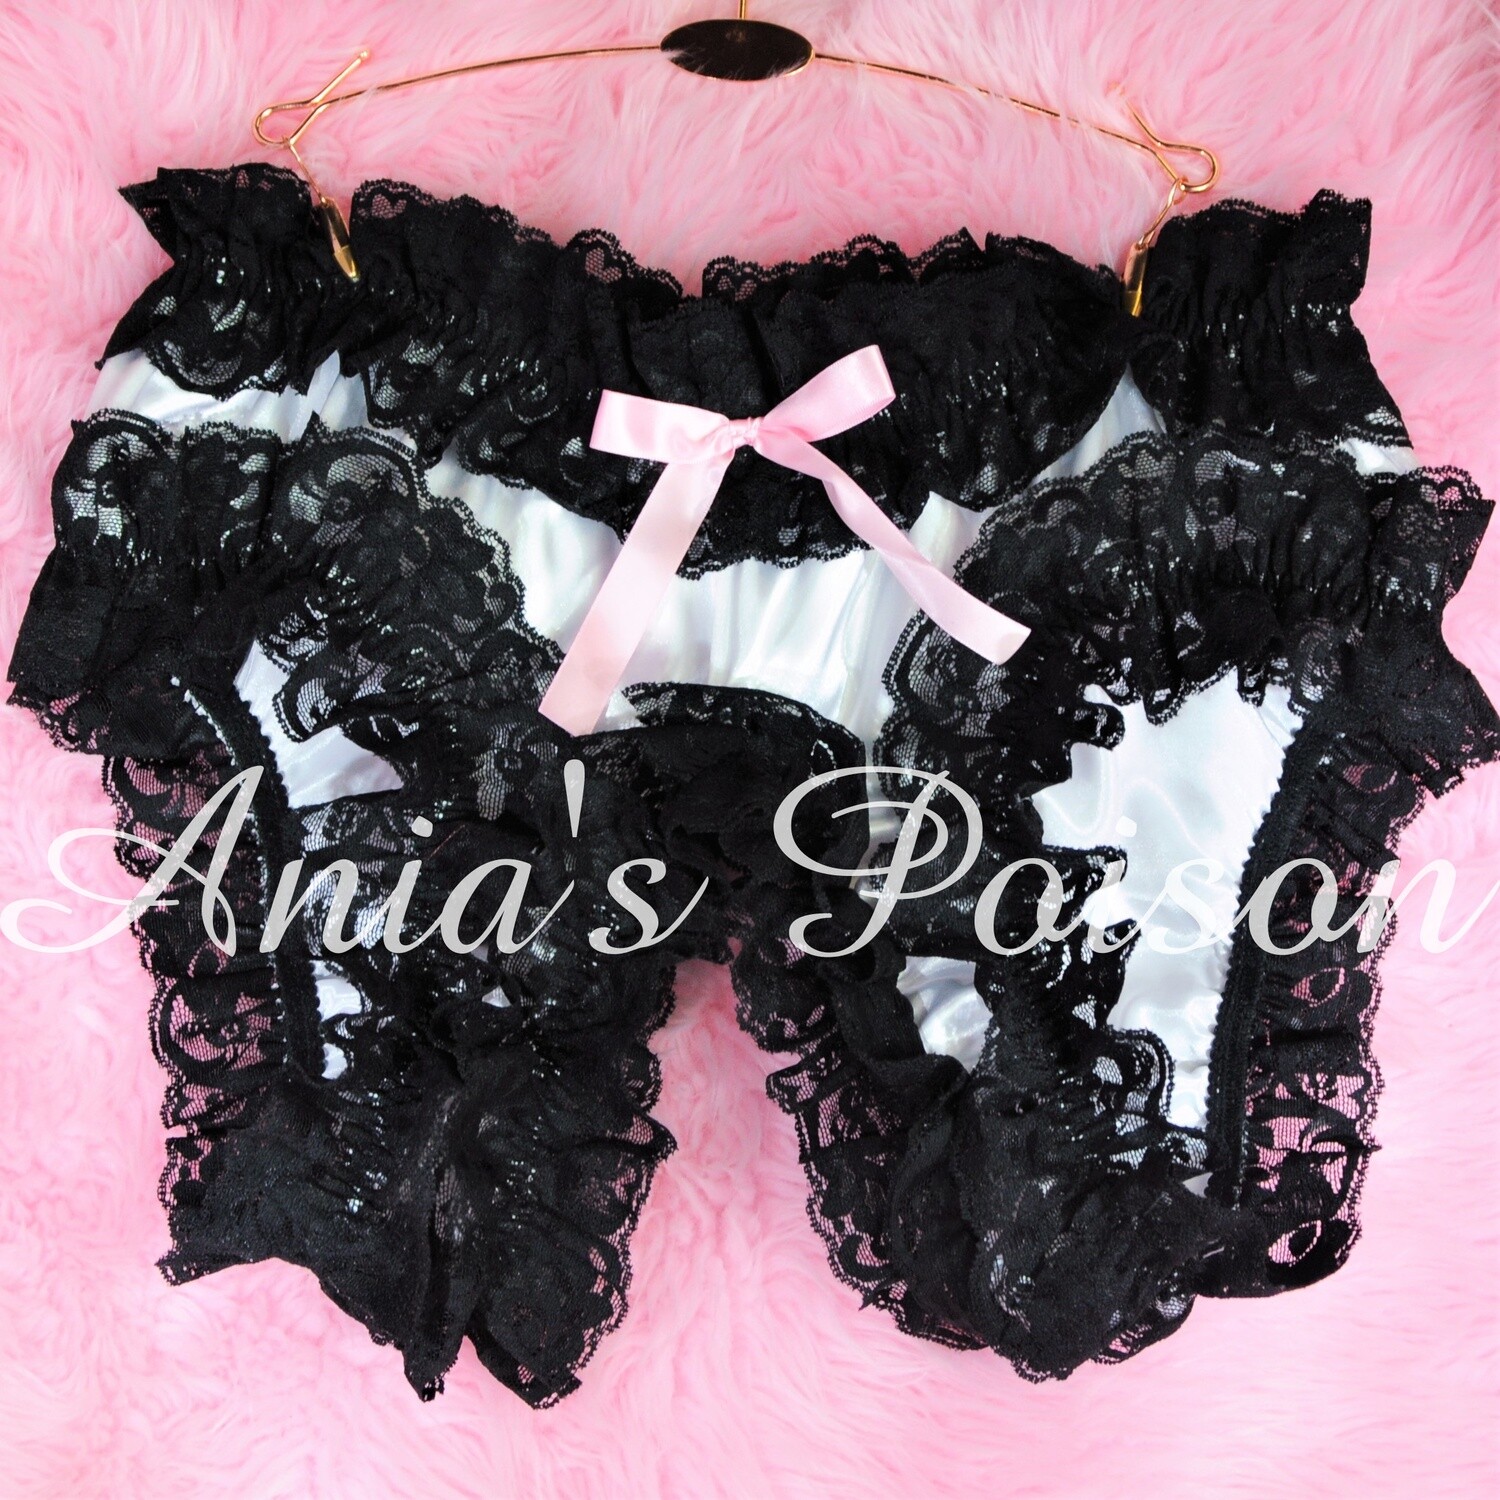 Sissy Spanking Maid satin high cut super frilly open crotch shiny crotchless unisex humiliation lace panties Black and Whites